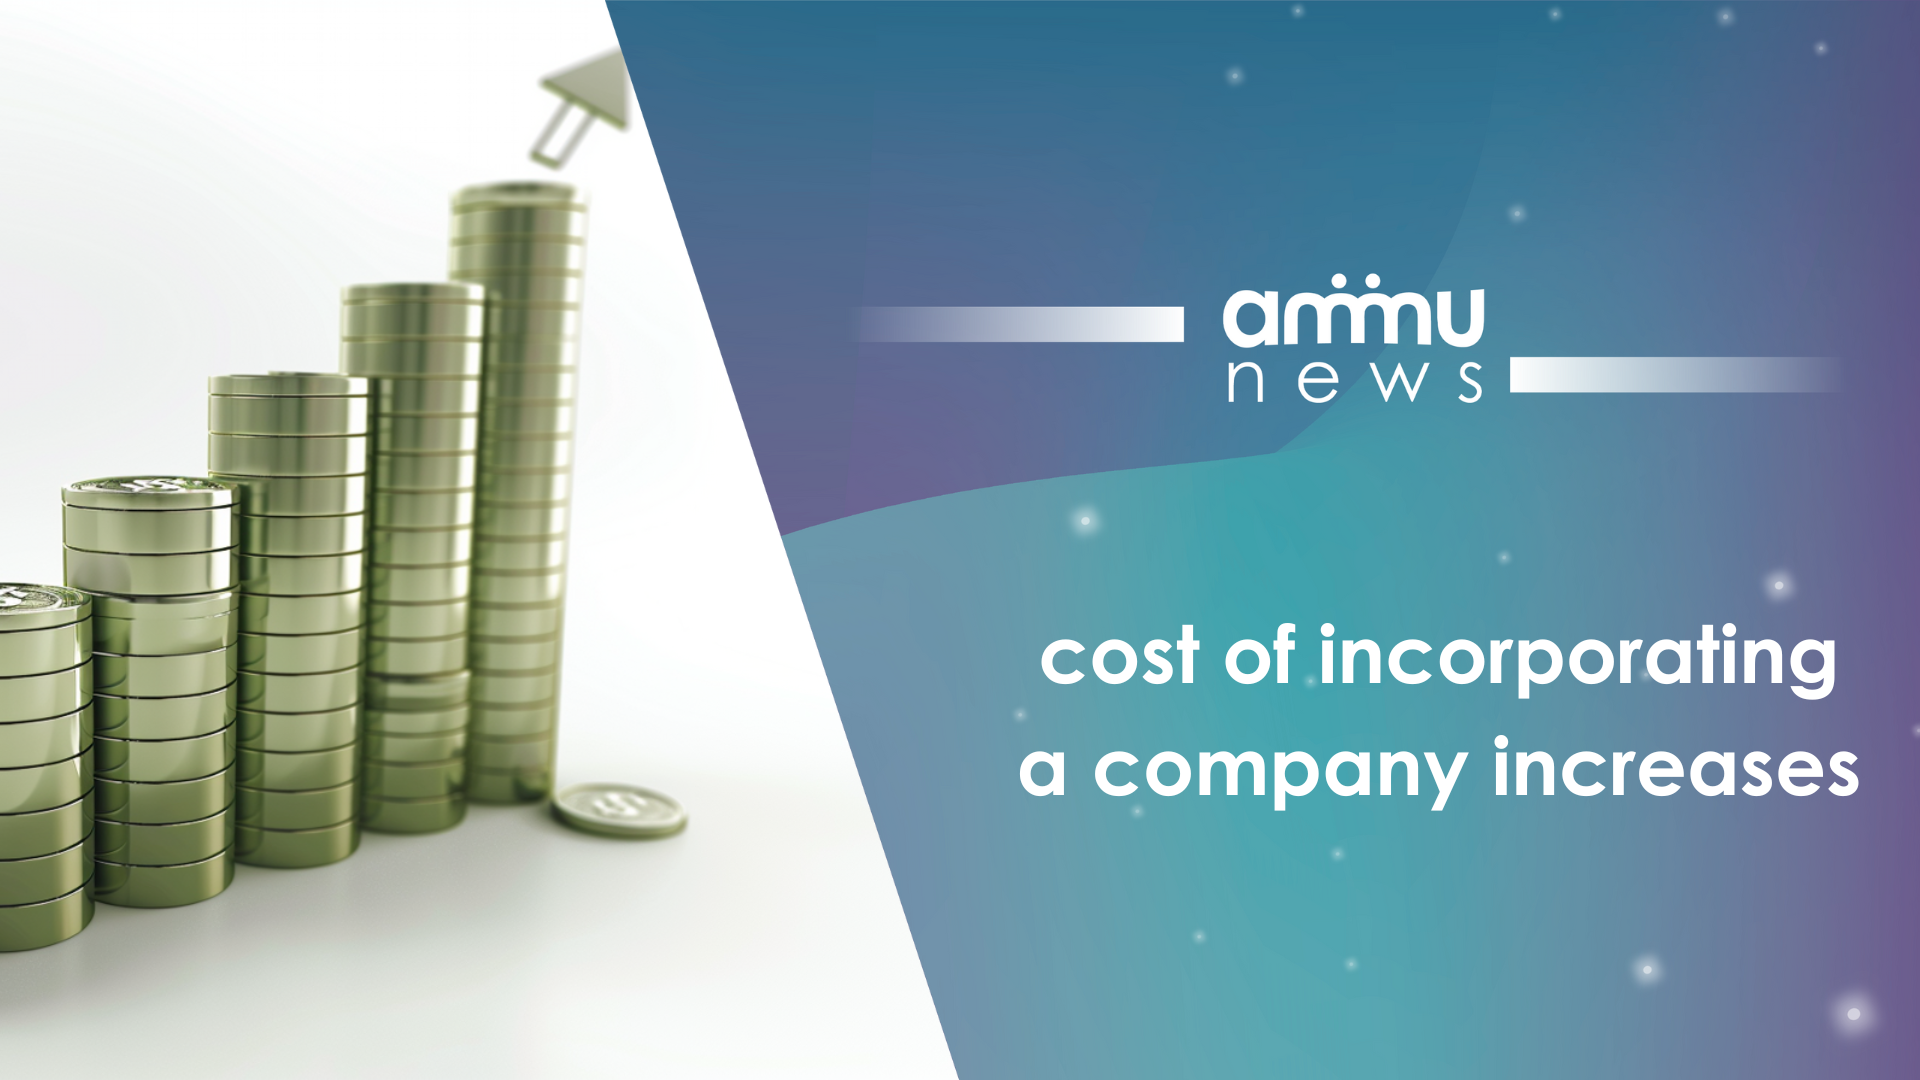 The cost of incorporating a company increases